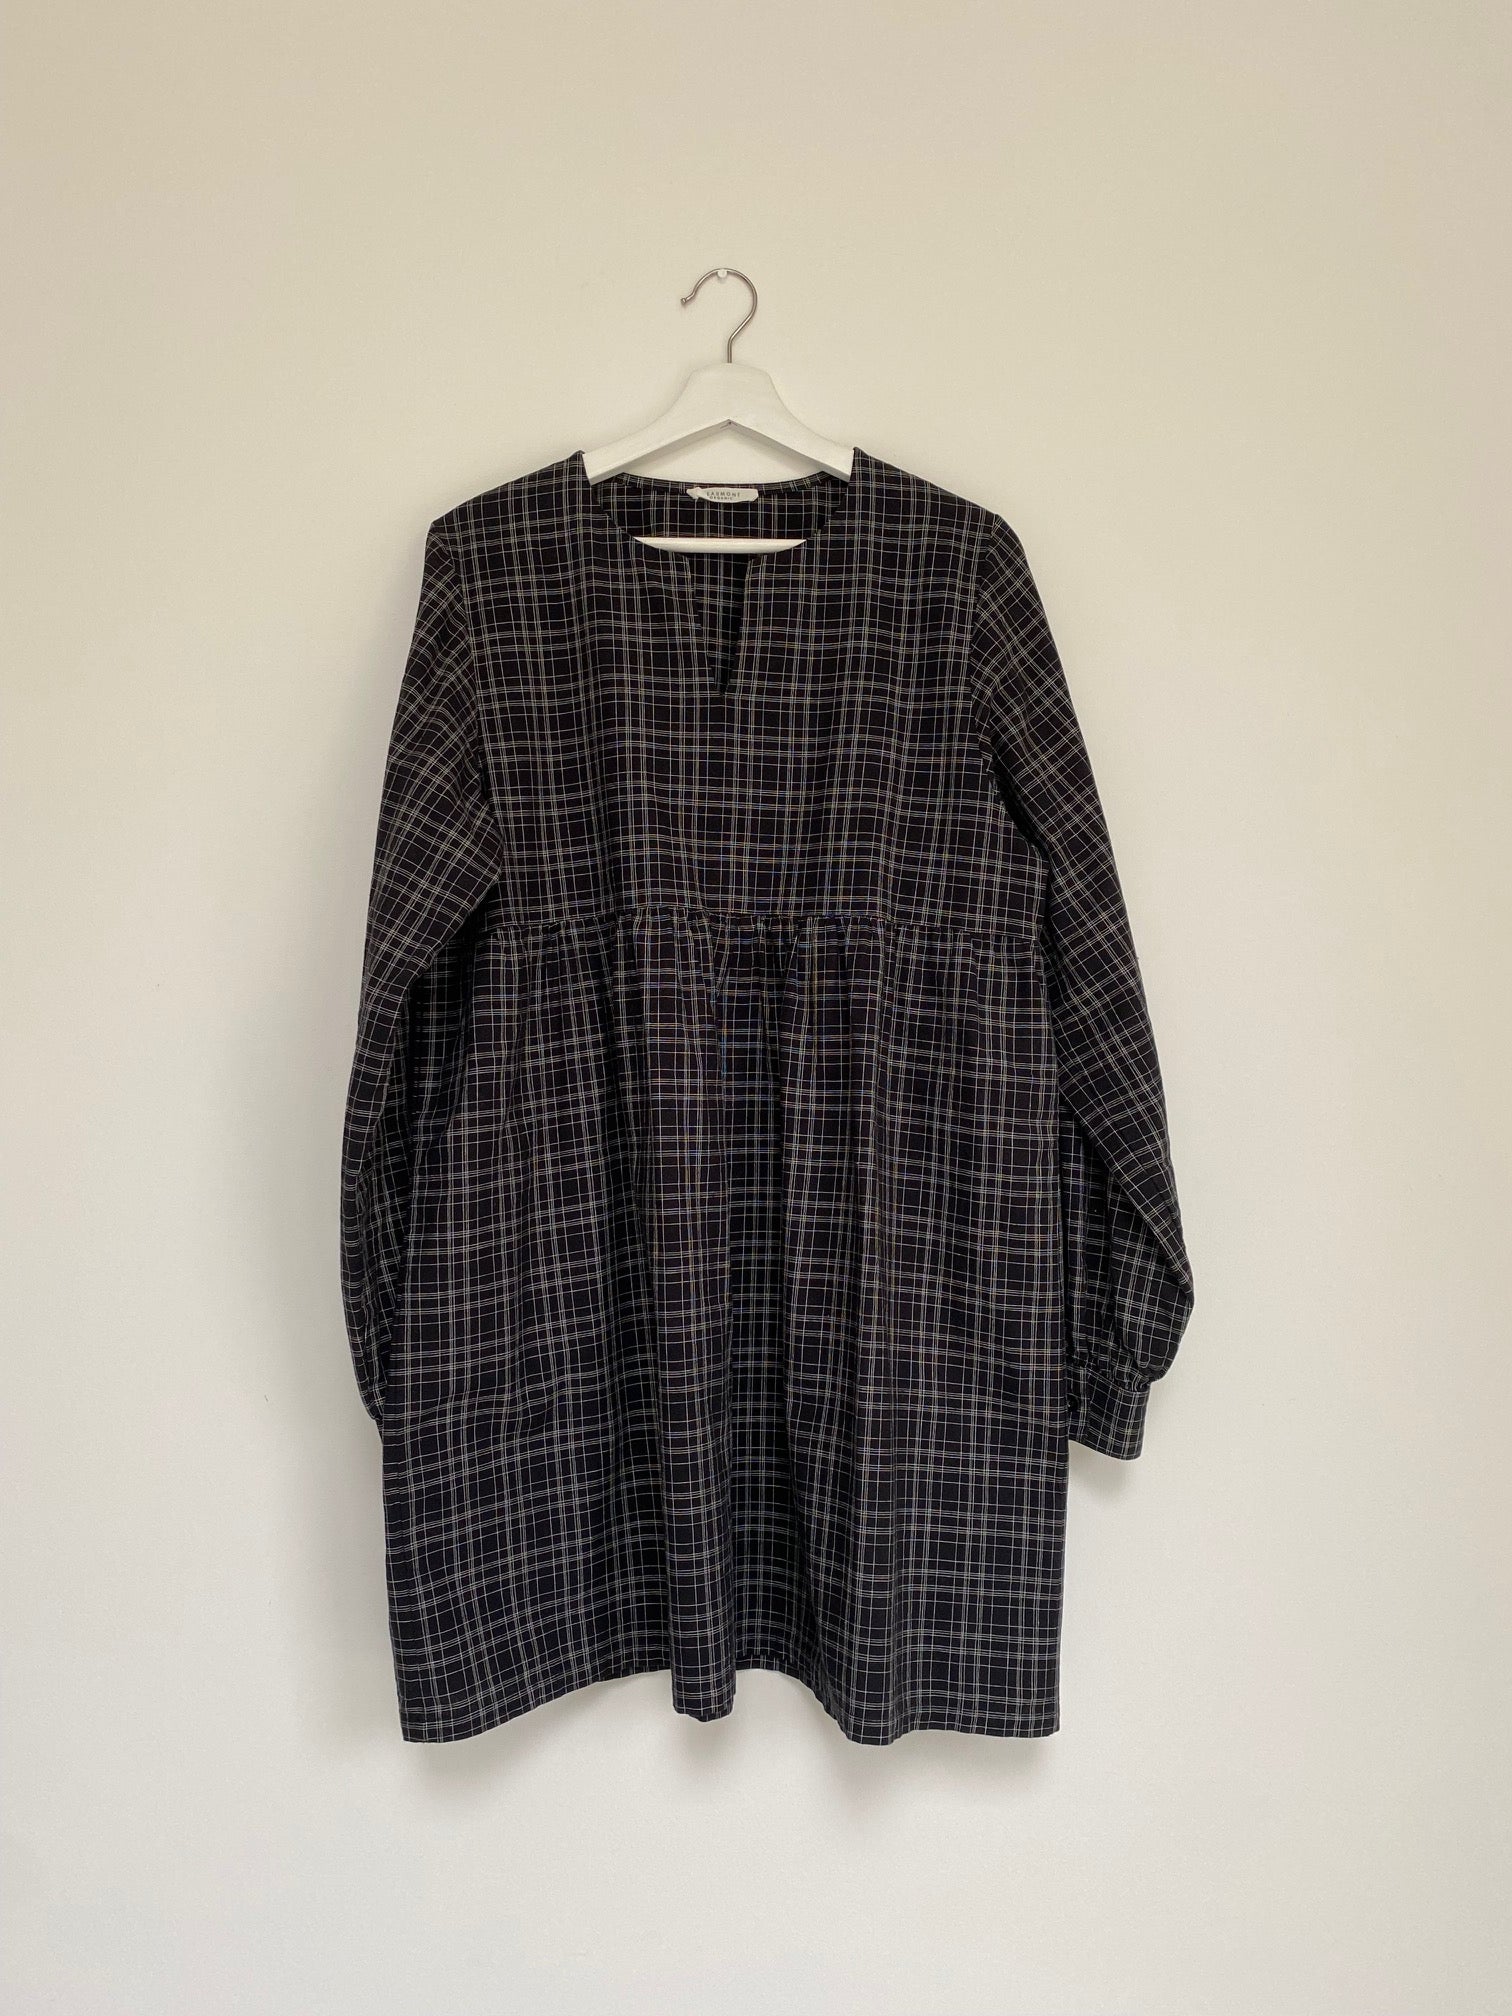 Eloise-Cay Dress in Black & White Check Size S